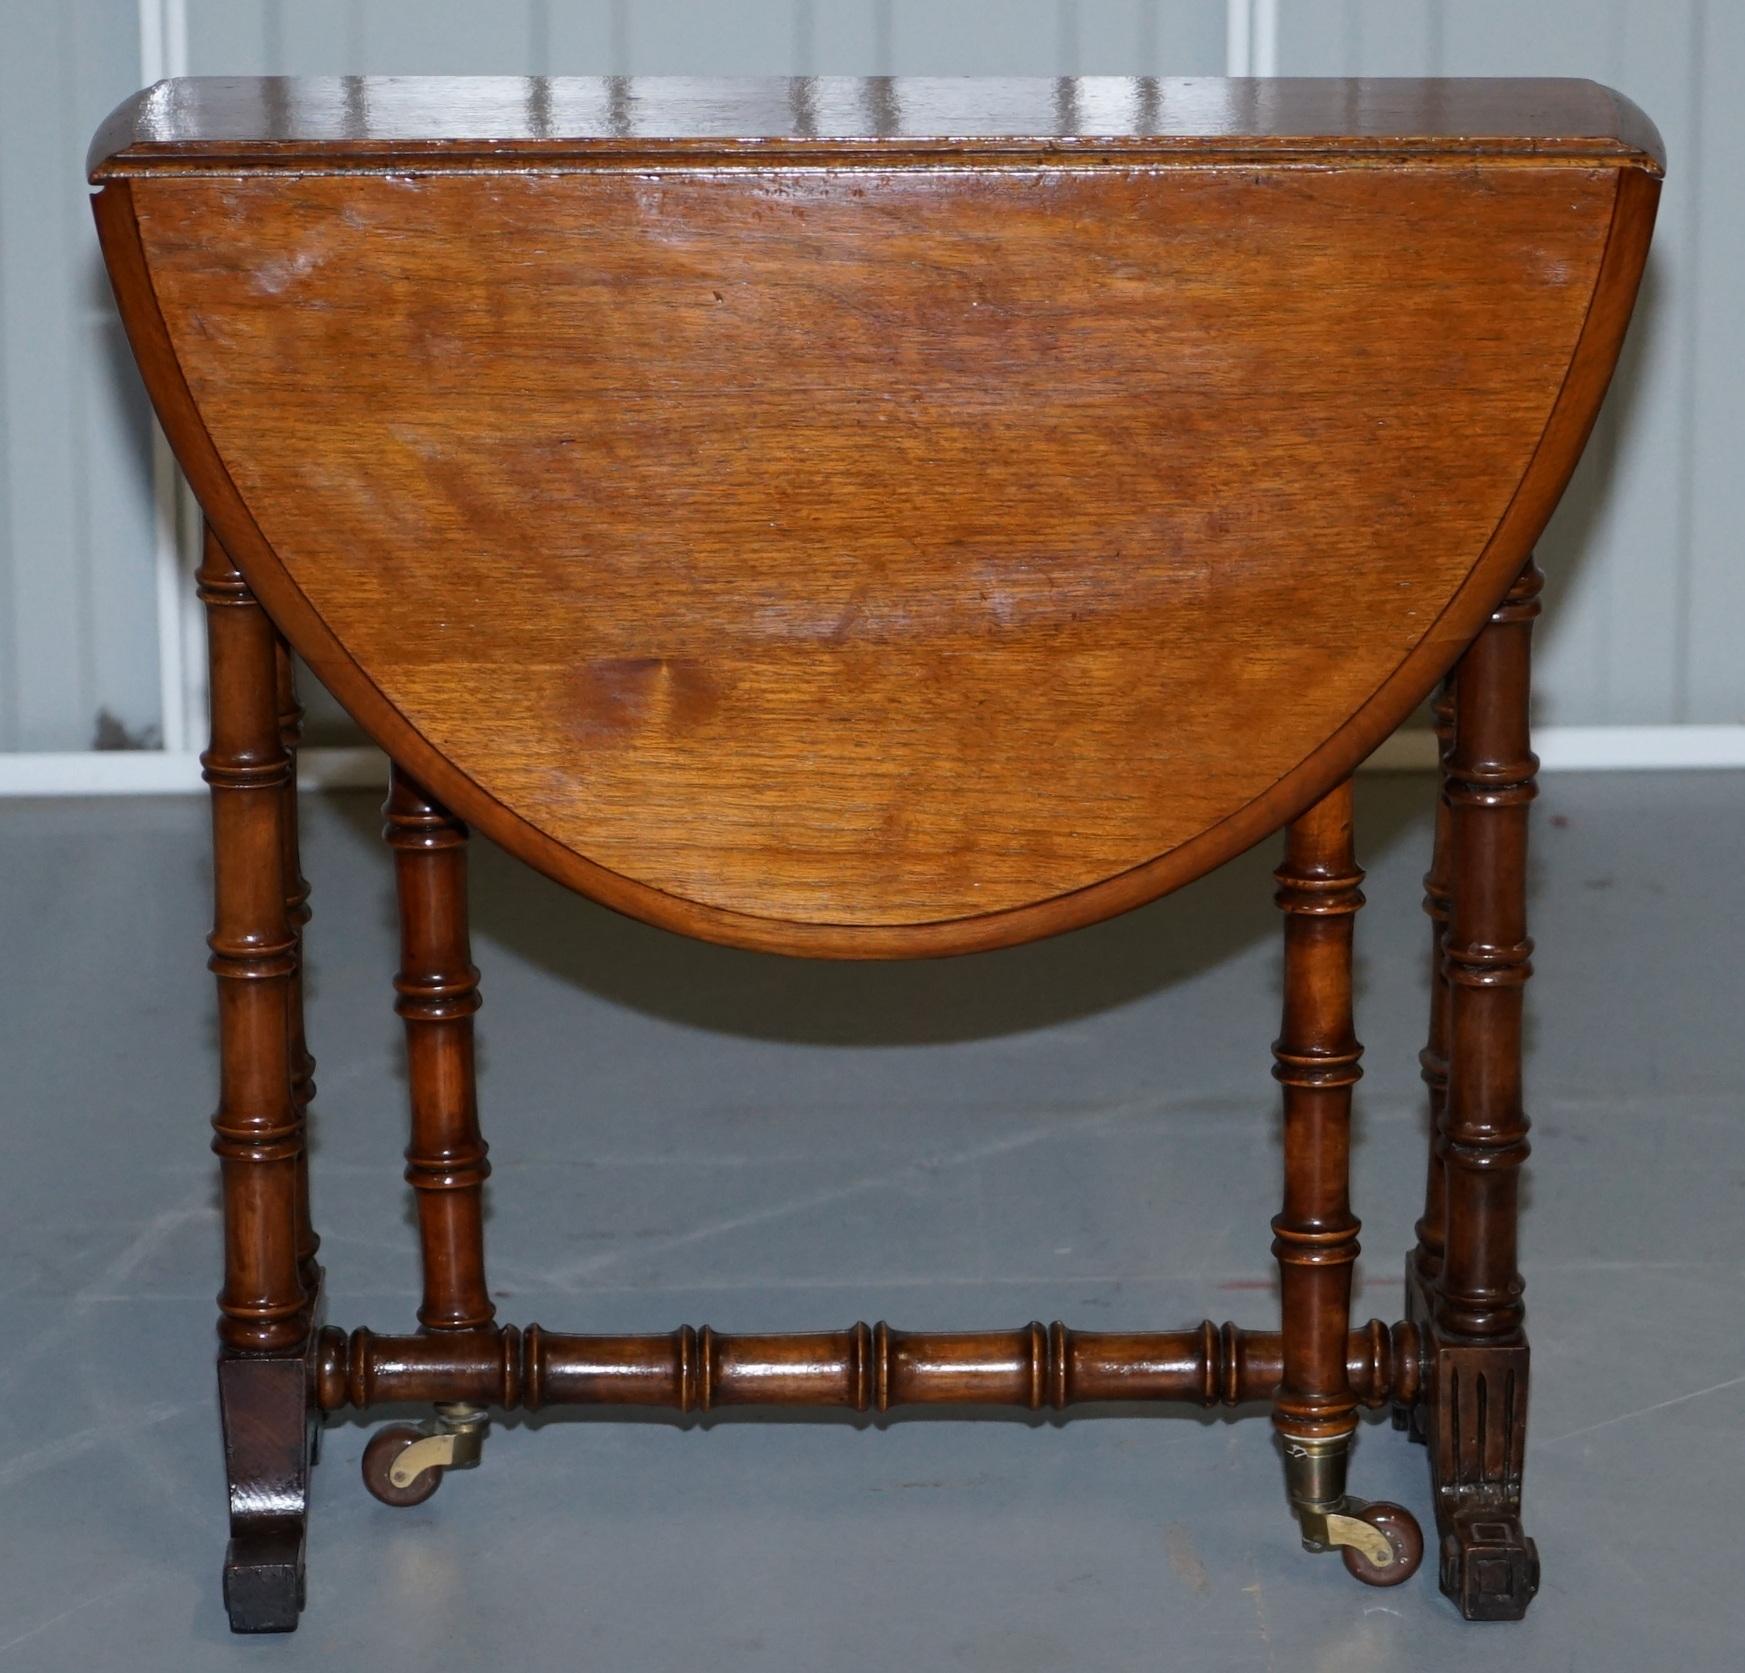 We are delighted to offer for sale this rare original Victorian Walnut with porcelain castors salesman sample gateleg table with famboo frame

This is a rare little piece, it is as mentioned a salesman sample, if you’re not familiar basically in